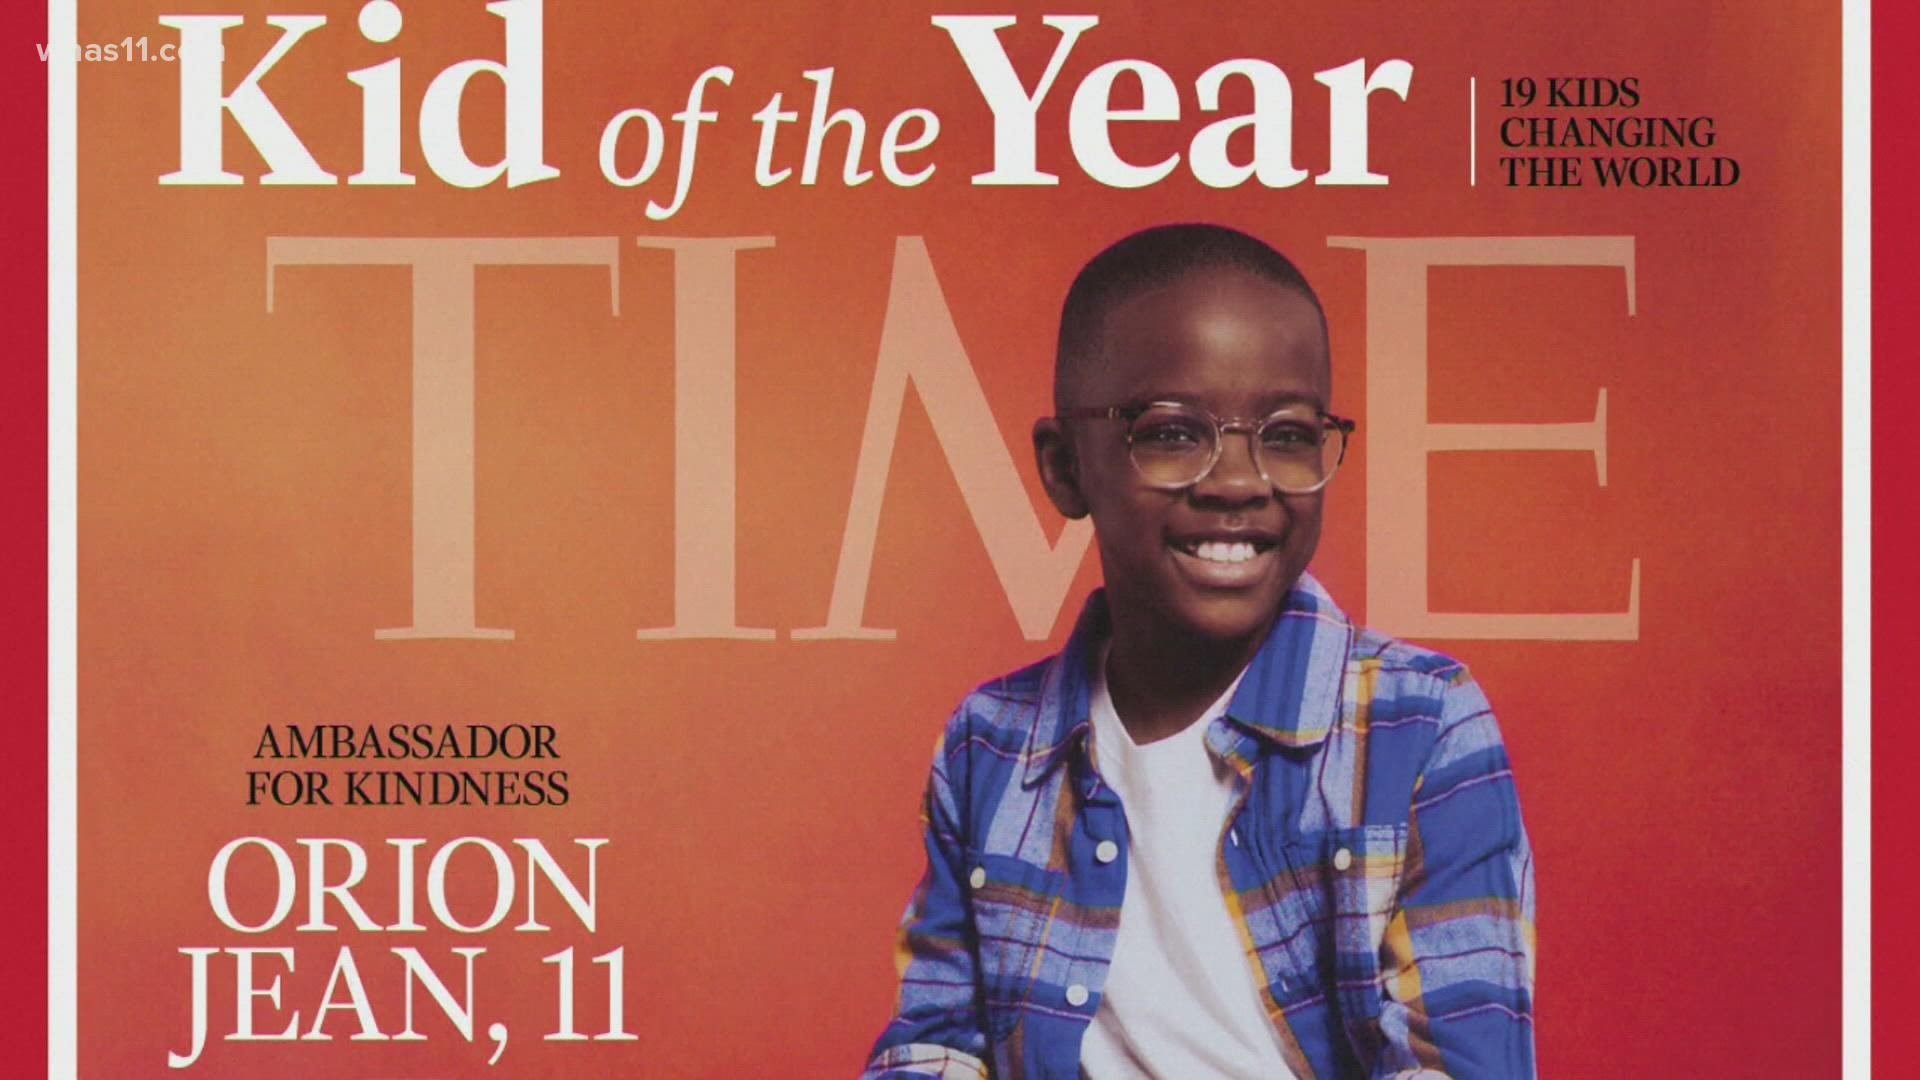 11-year-old Orion Jean has been named TIME's Kid of the Year. It's the magazine's second annual honoring of a child making an impact in their community.